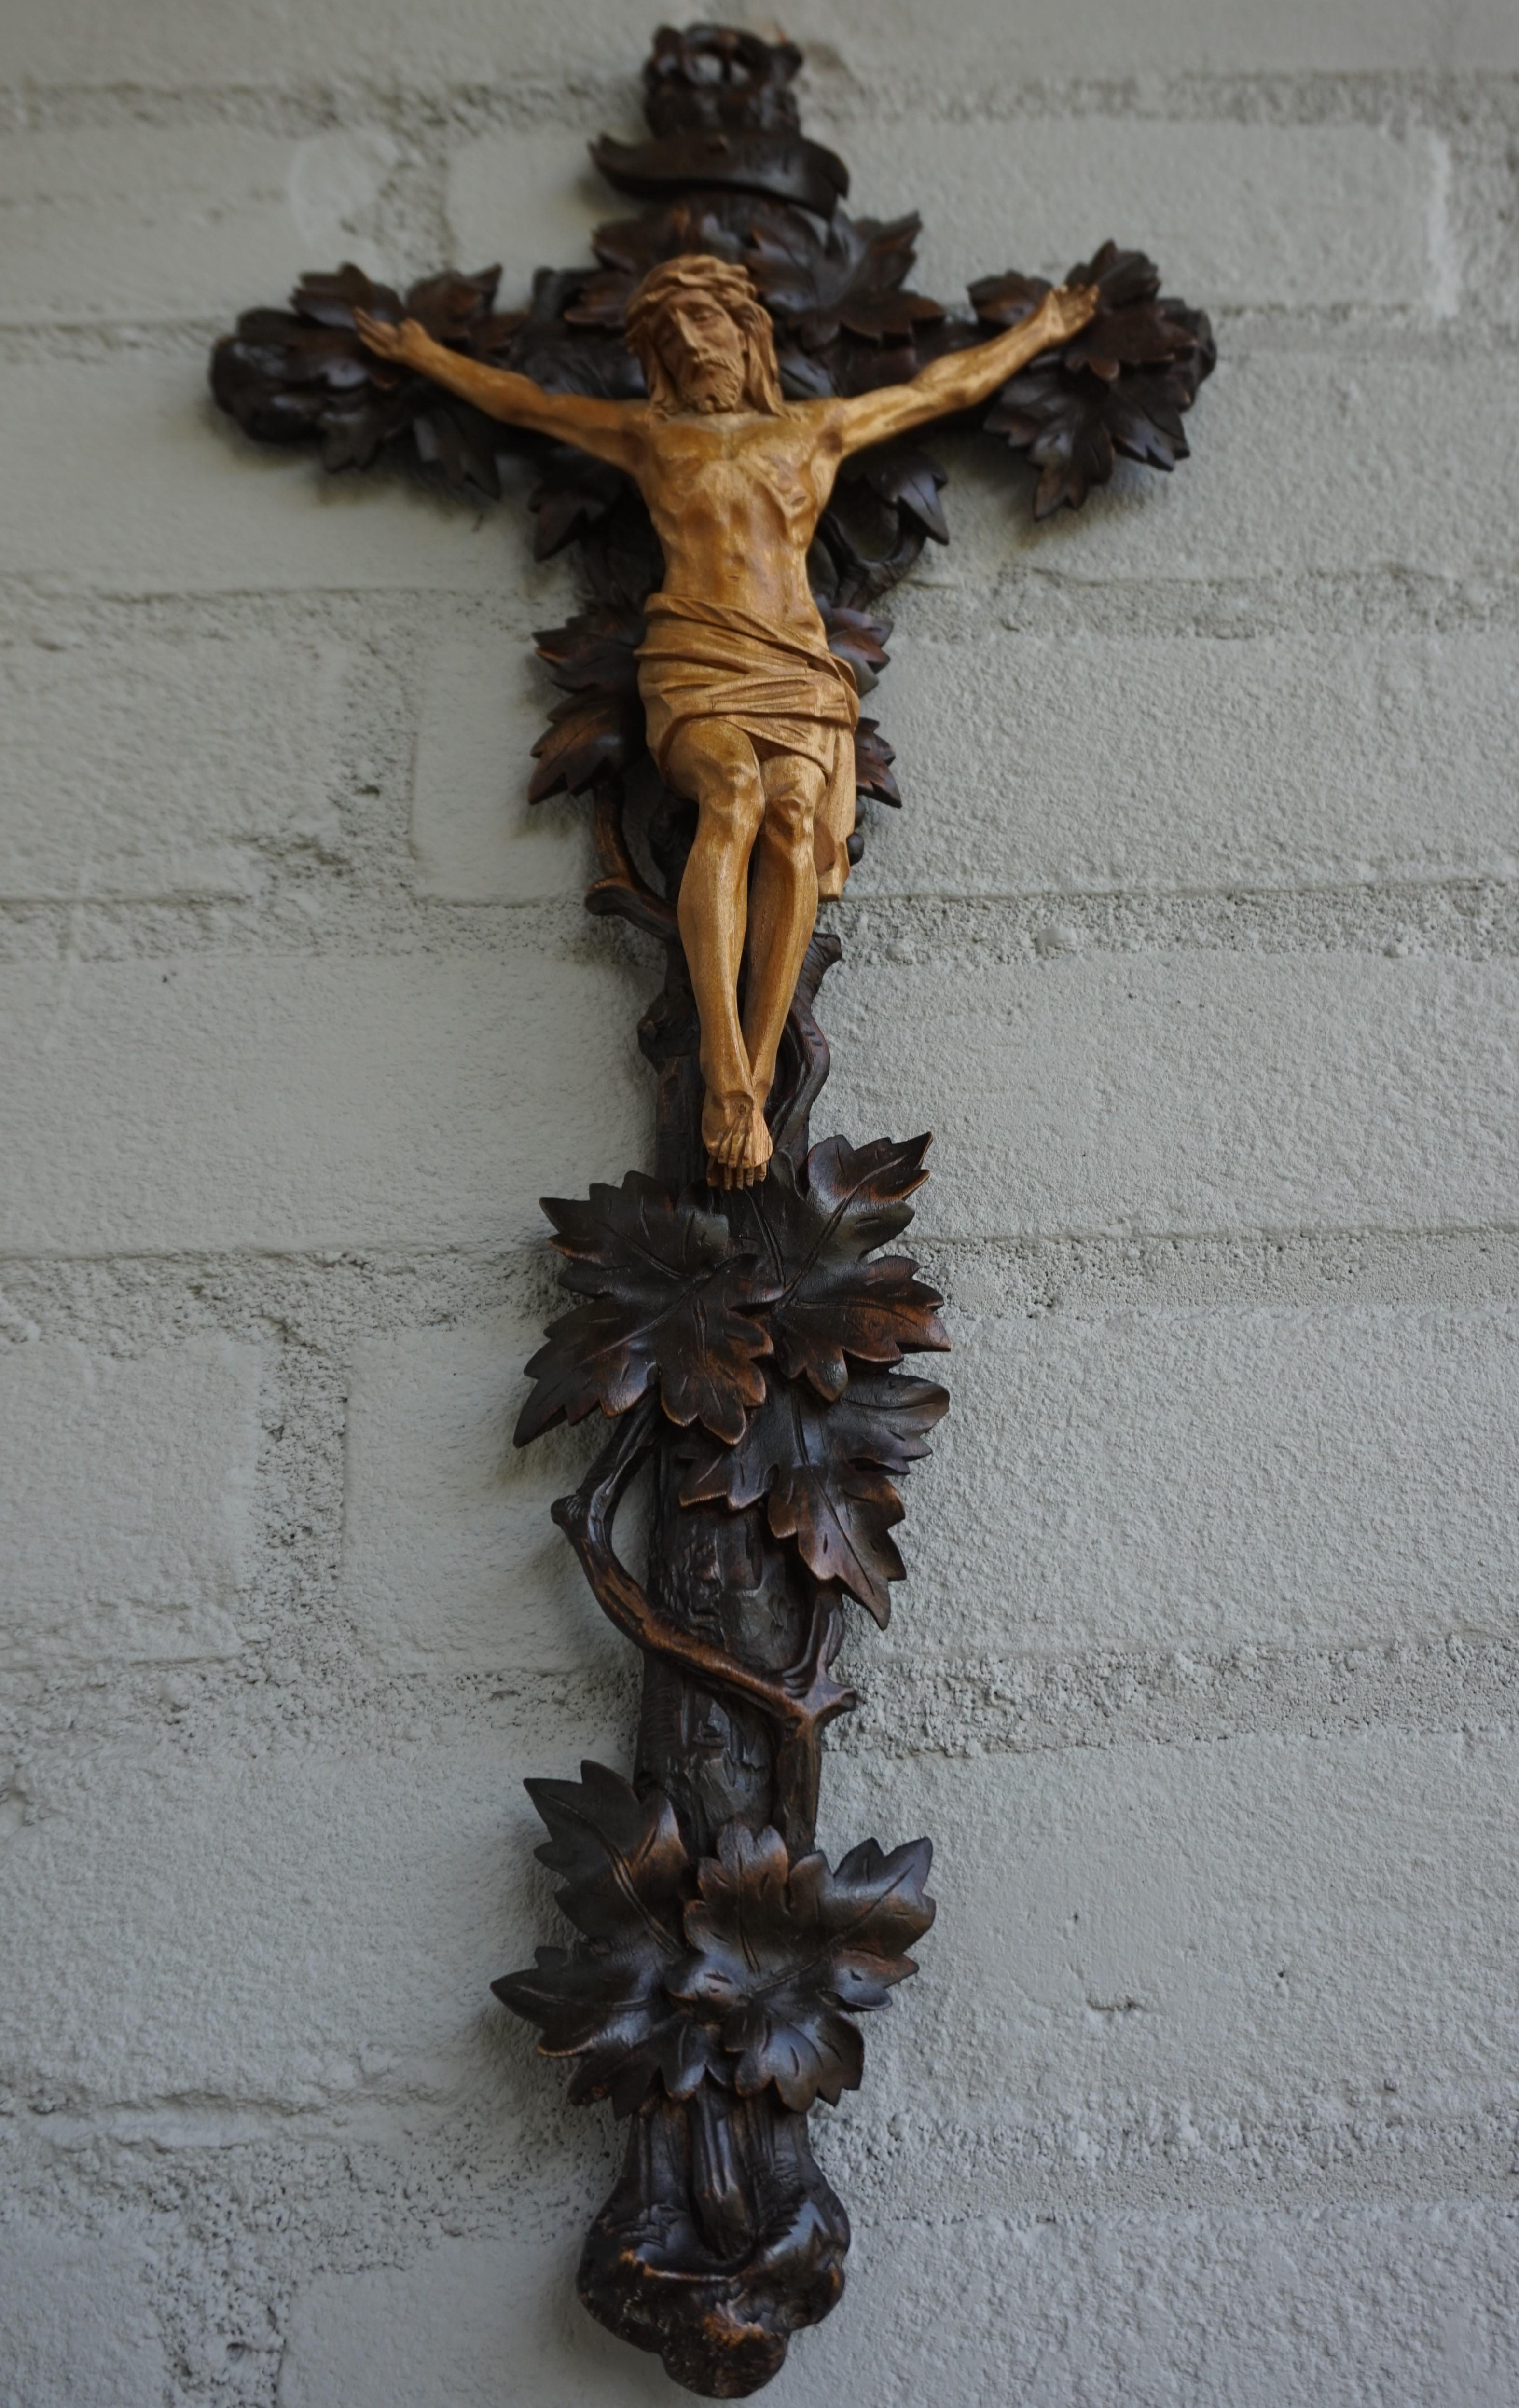 Amazingly hand carved Black Forest cross with matching size corpus.

Over the decades we have sold a number of unique and interesting crucifixes, but we had not yet come across a branches and leaf entwined cross in the Swiss Black Forest style. To